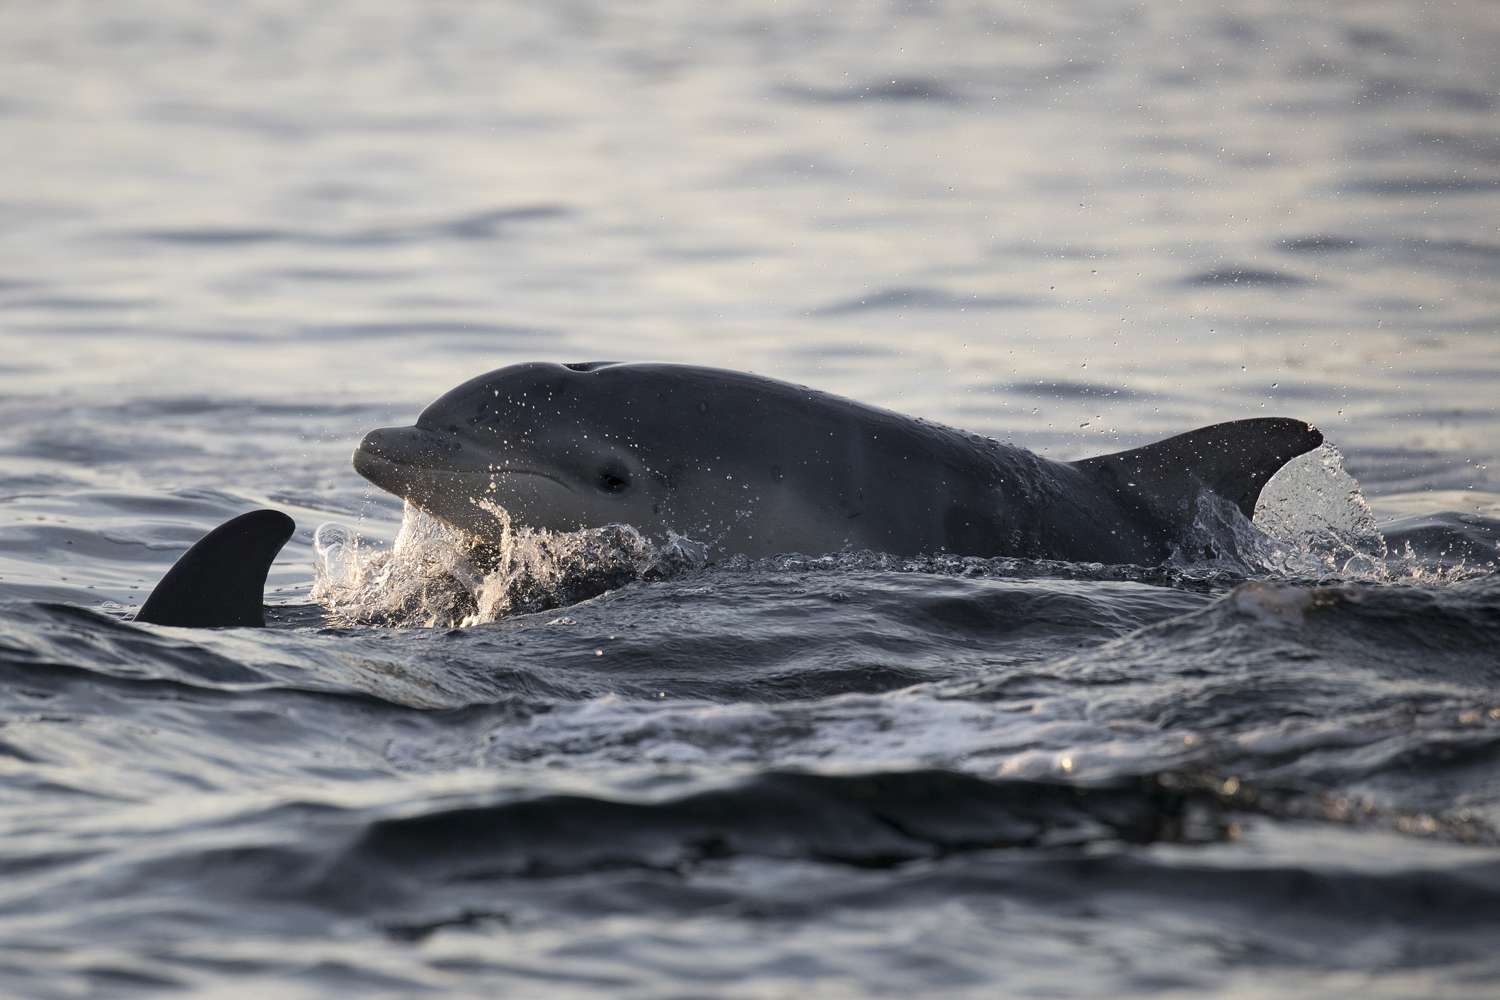 Bottlenose dolphins in the Moray Firth